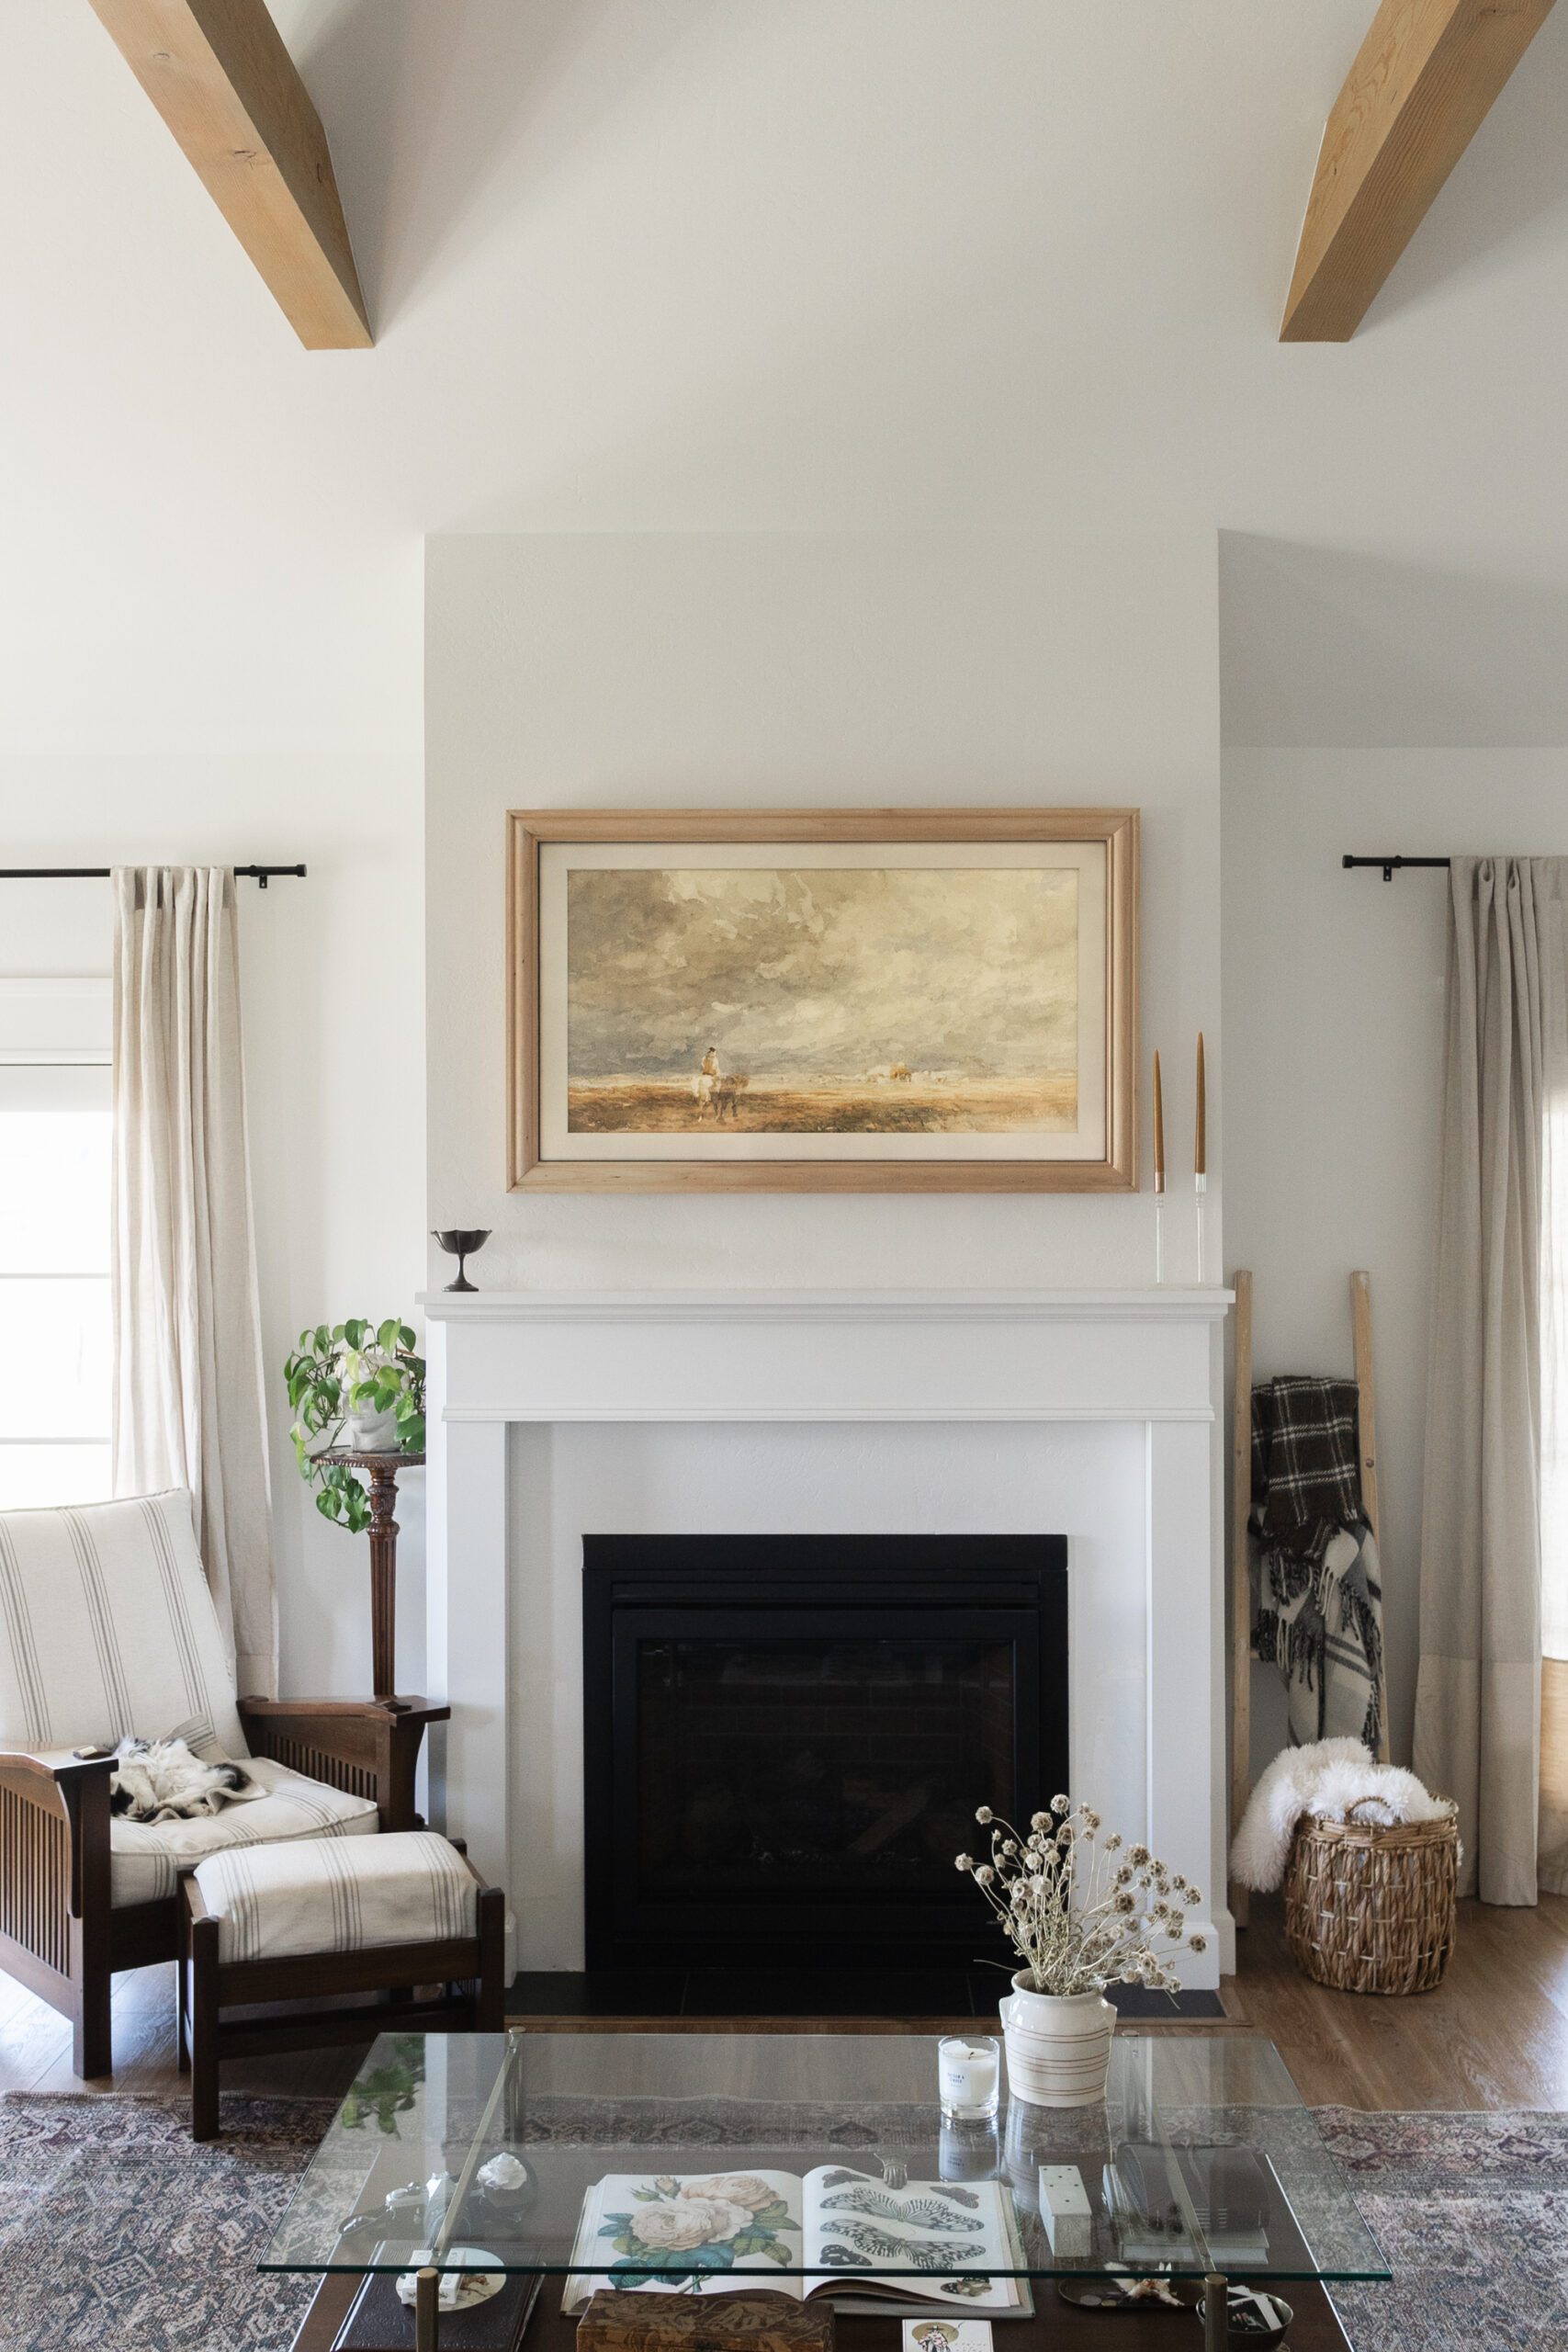 how to mount a Samsung Frame TV above a mantle that makes sense from a design and function perspective